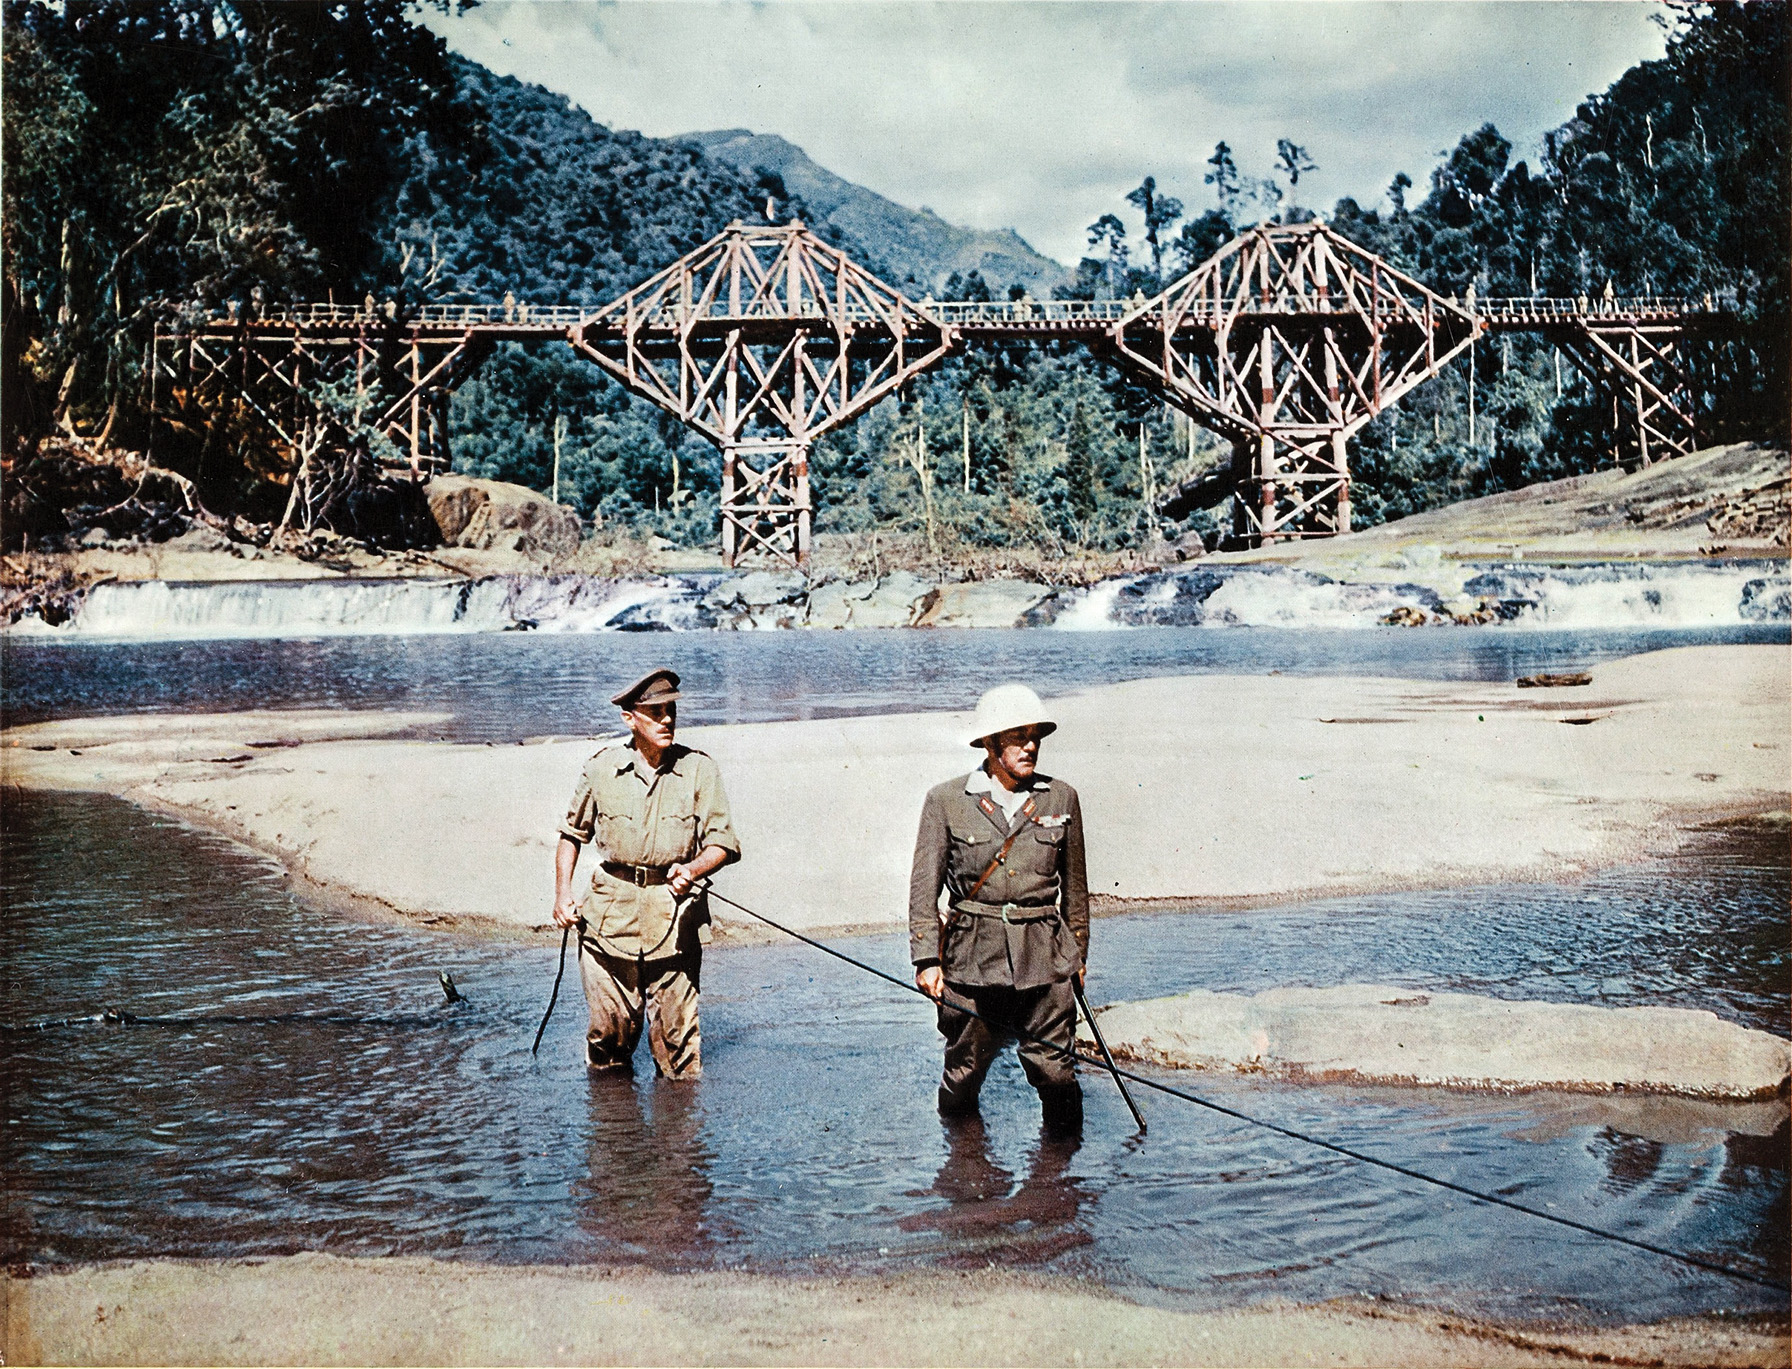 In the climactic scene in the movie The Bridge on the River Kwai, British officer Colonel Nicholson (Alec Guinness, left) leads Japanese Colonel Saito (Sessue Hayakawa) to the detonator primed by the commando team by following the wire that has been exposed by the low water level.